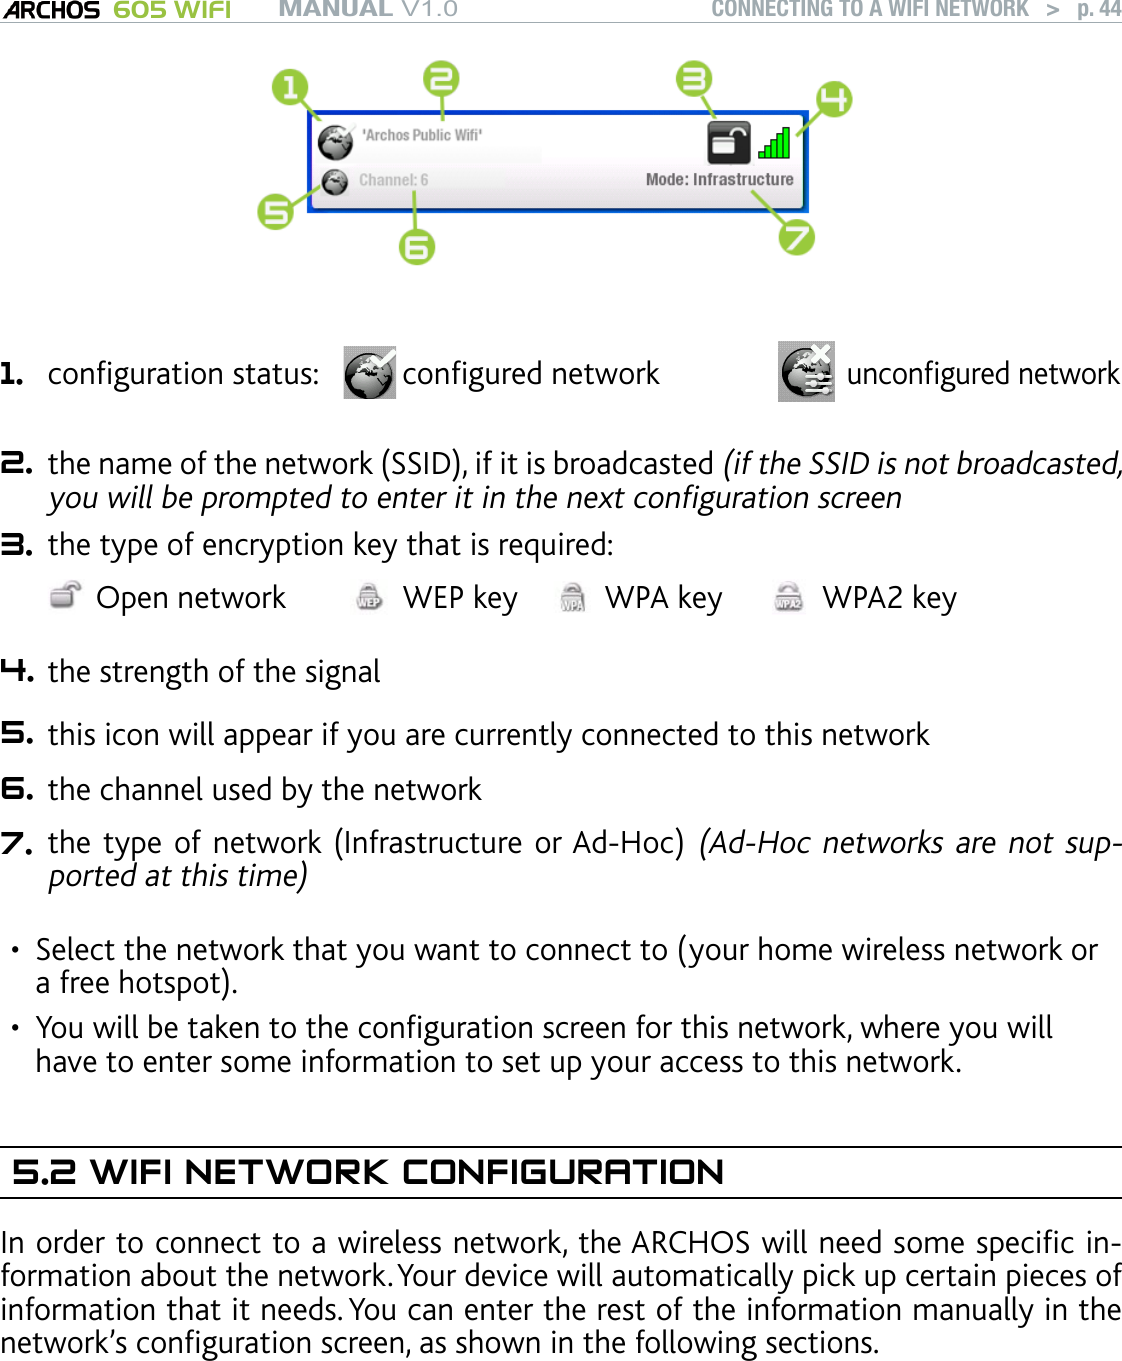 MANUAL V1.0 605 WIFI CONNECTING TO A WIFI NETWORK   &gt;   p. 441. conguration status: congured networkuncongured network2. the name of the network (SSID), if it is broadcasted (if the SSID is not broadcasted, you will be prompted to enter it in the next conguration screen3. the type of encryption key that is required:Open network WEP key WPA key WPA2 key4. the strength of the signal5. this icon will appear if you are currently connected to this network6. the channel used by the network7. the type of network (Infrastructure or Ad-Hoc) (Ad-Hoc networks are not sup-ported at this time)Select the network that you want to connect to (your home wireless network or a free hotspot).You will be taken to the conguration screen for this network, where you will have to enter some information to set up your access to this network.5.2 WIFI NETWORK CONFIGURATIONIn order to connect to a wireless network, the ARCHOS will need some specic in-formation about the network. Your device will automatically pick up certain pieces of information that it needs. You can enter the rest of the information manually in the network’s conguration screen, as shown in the following sections.Note that your device will remember the network connection information that you en-ter, in order to re-use it and connect automatically to the network when it is in range.••